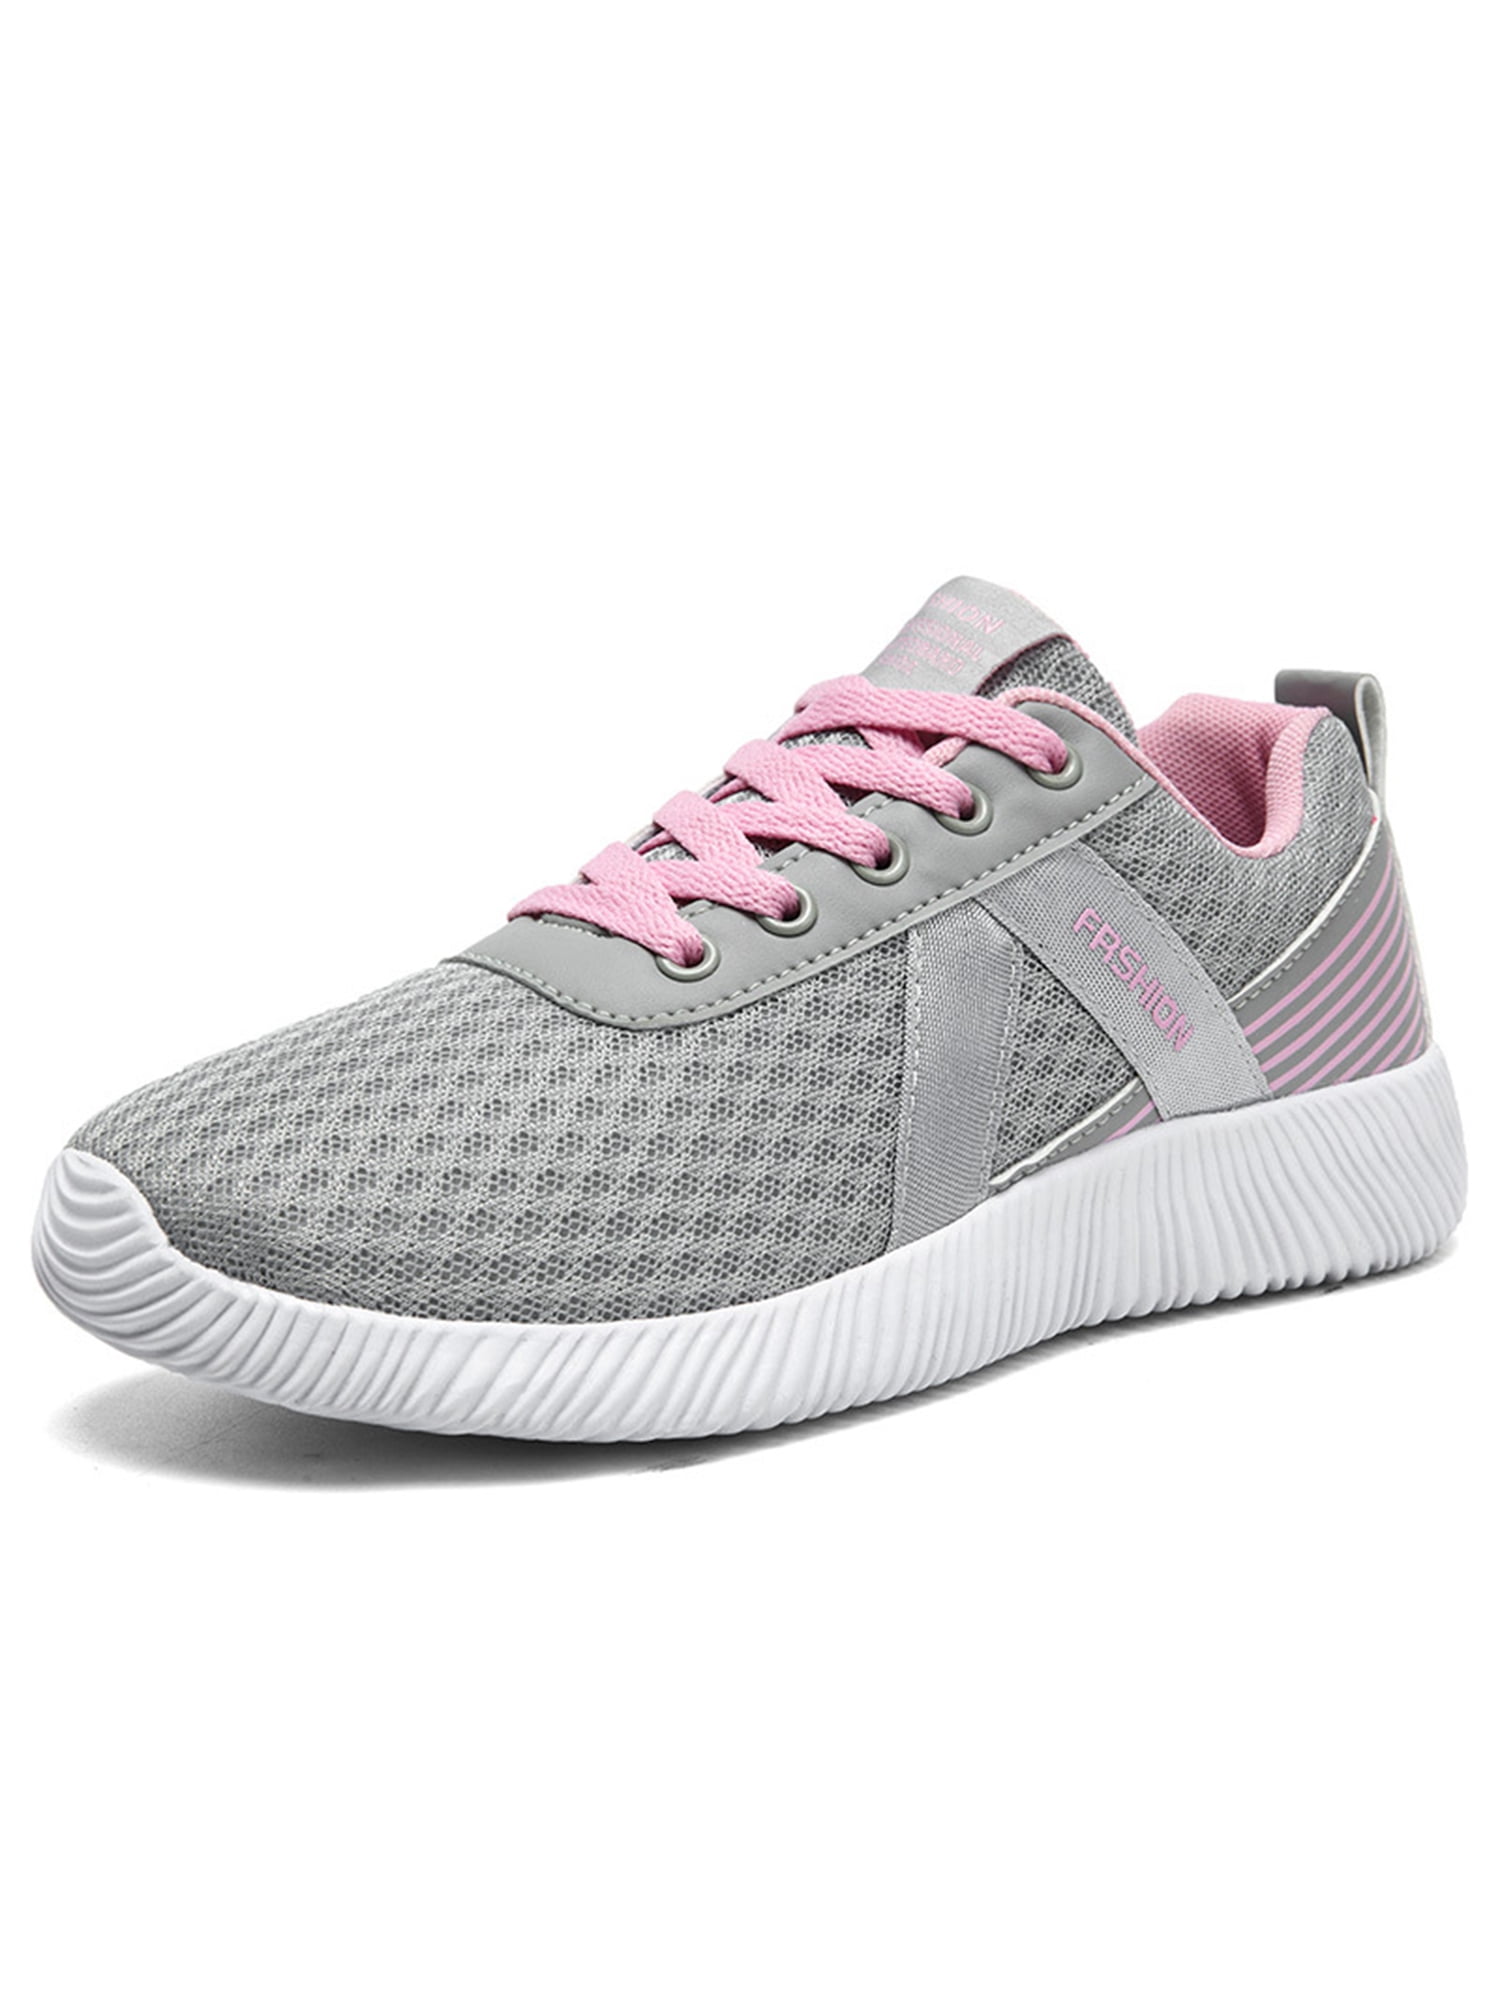 Women Mesh Cloth Sneakers Lace Up Casual Shoes Athletic Sport Running Trainers 